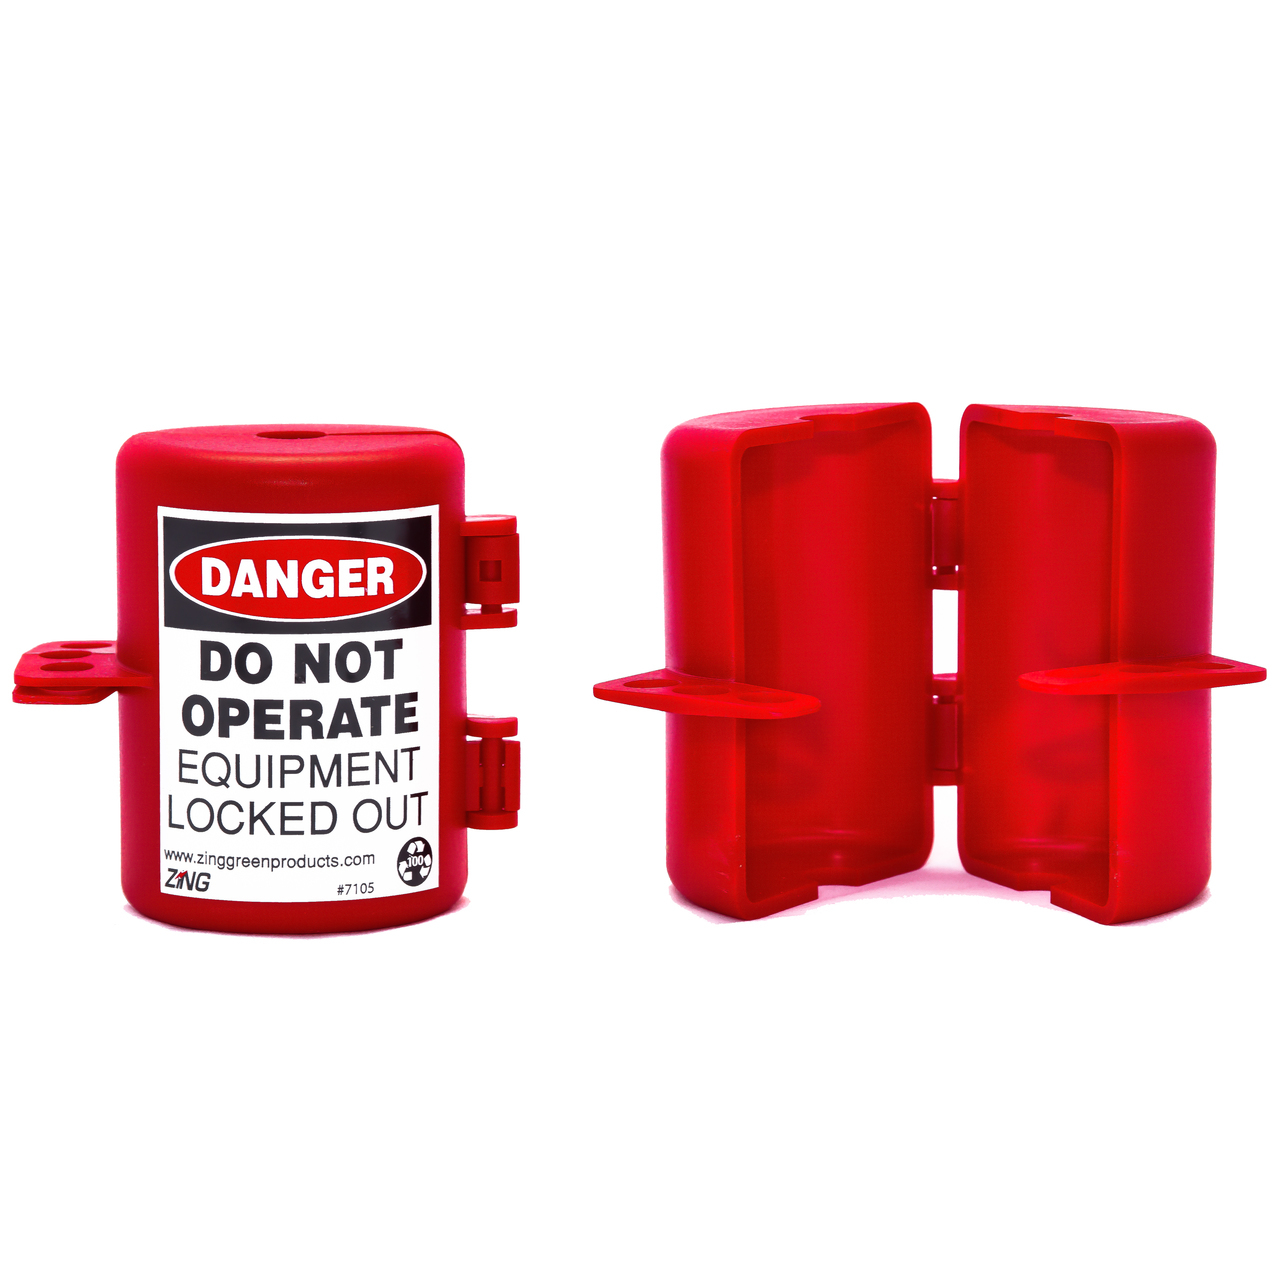 ZING RecycLockout Lockout Tagout, Small Plug Lockout, Recycled Plastic